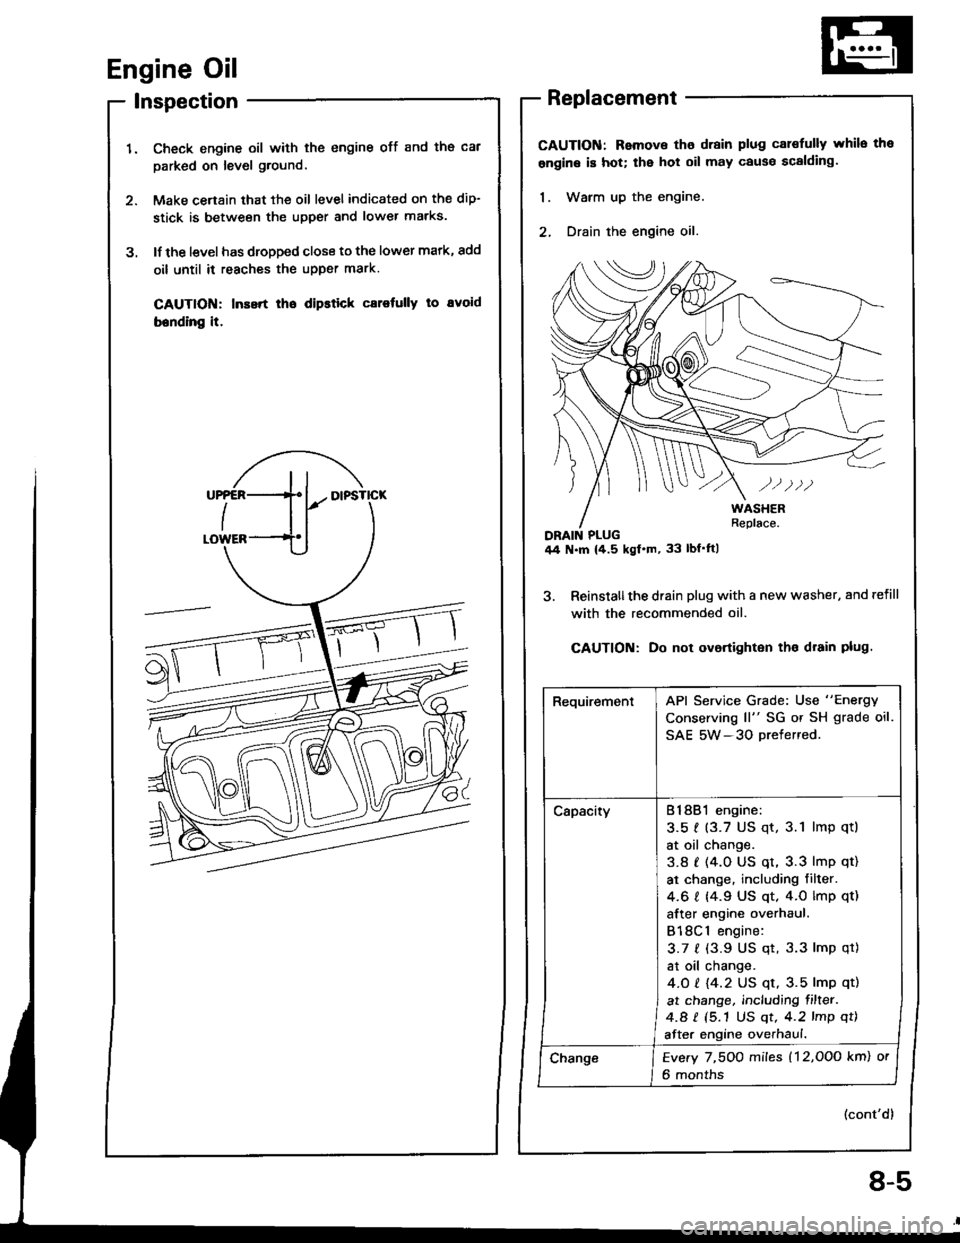 ACURA INTEGRA 1994  Service Repair Manual Engine Oil
lnspection
Check engine oil with the engine off and ths cal
parked on level ground,
Make cenain that the oil level indicated on the dip-
stick is between the upper and lower marks.
lf the l